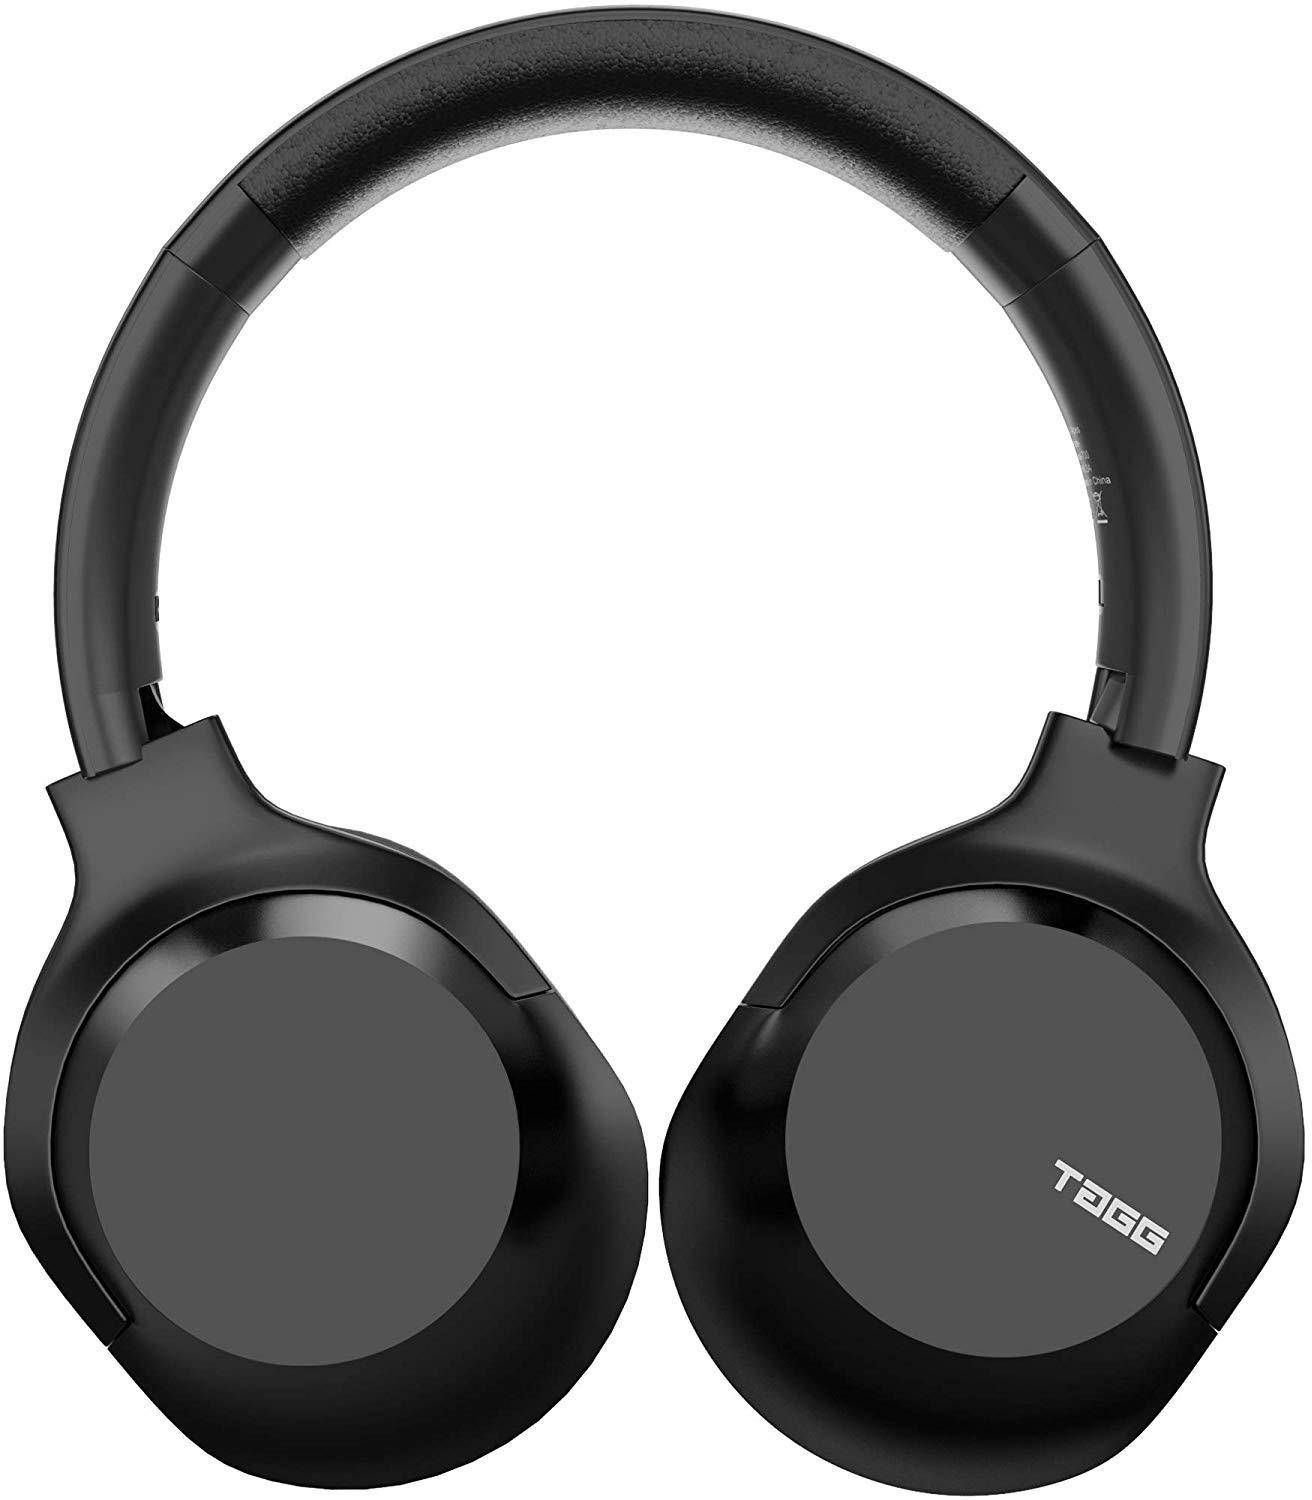 TAGG PowerBass 700 Over Ear Wireless Bluetooth Headphones with Mic zoom image